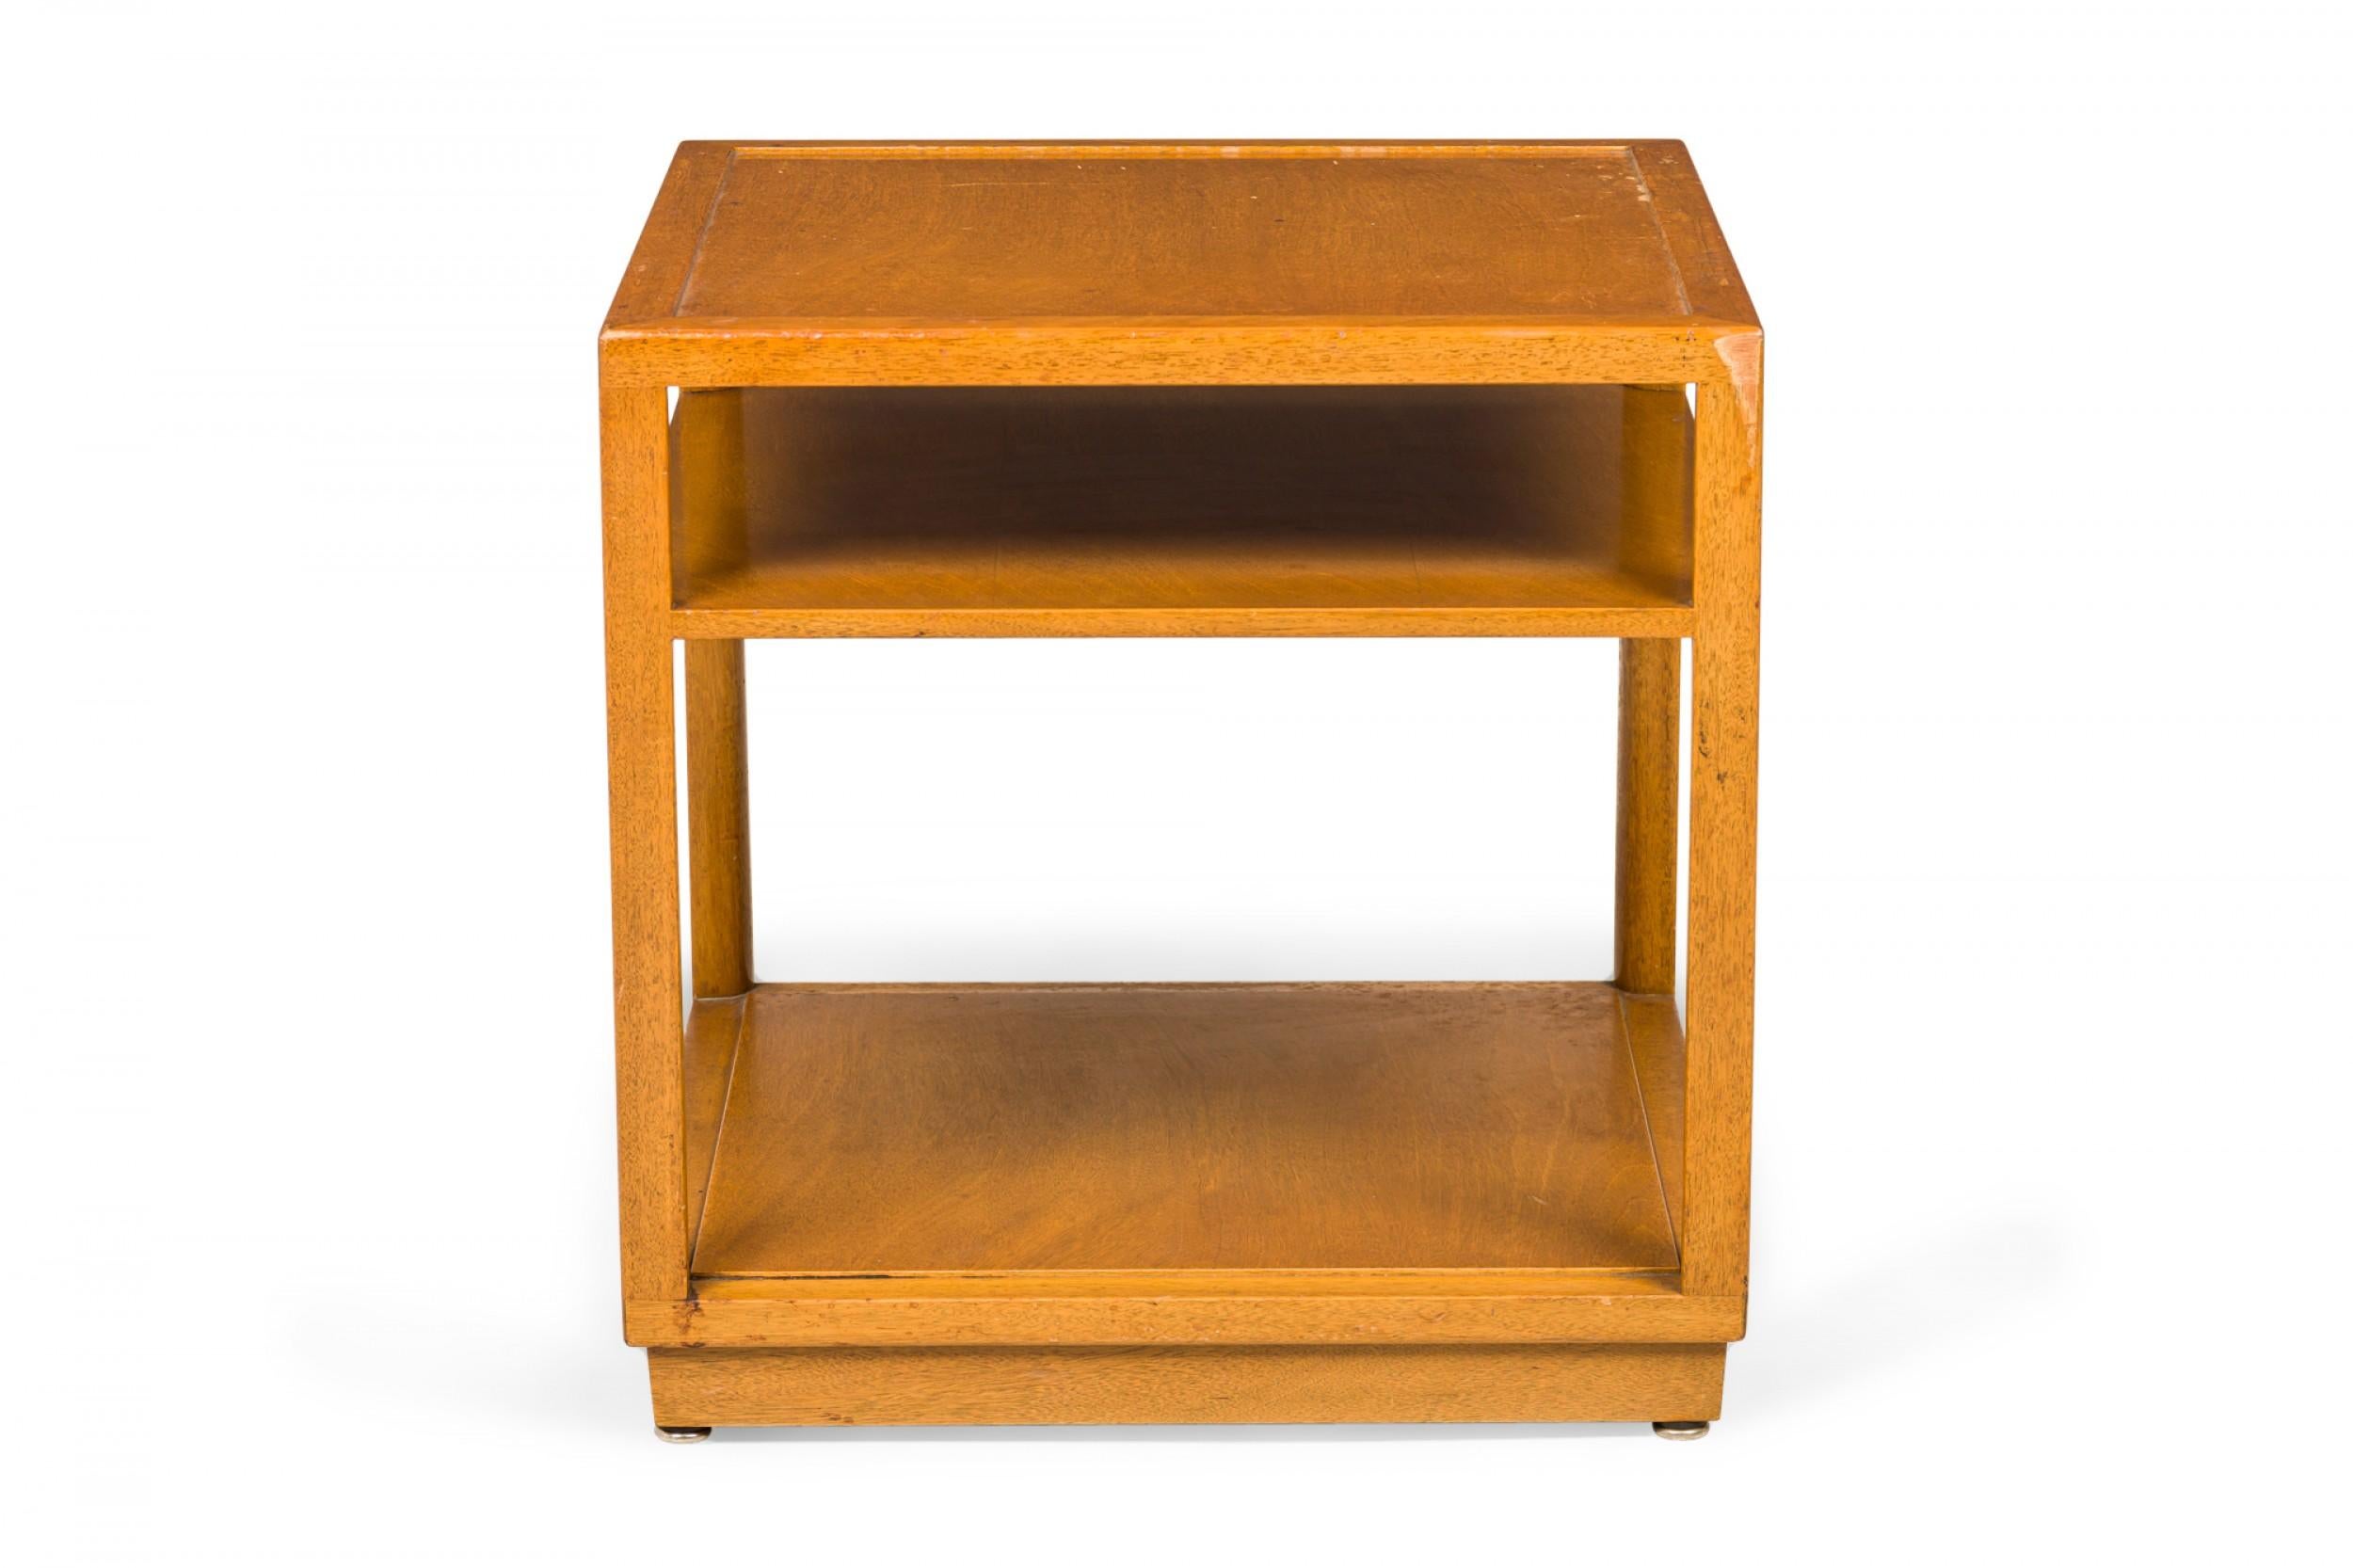 20th Century Pair of Edward Wormley for Dunbar Square Wooden Double Shelf End / Side Table For Sale